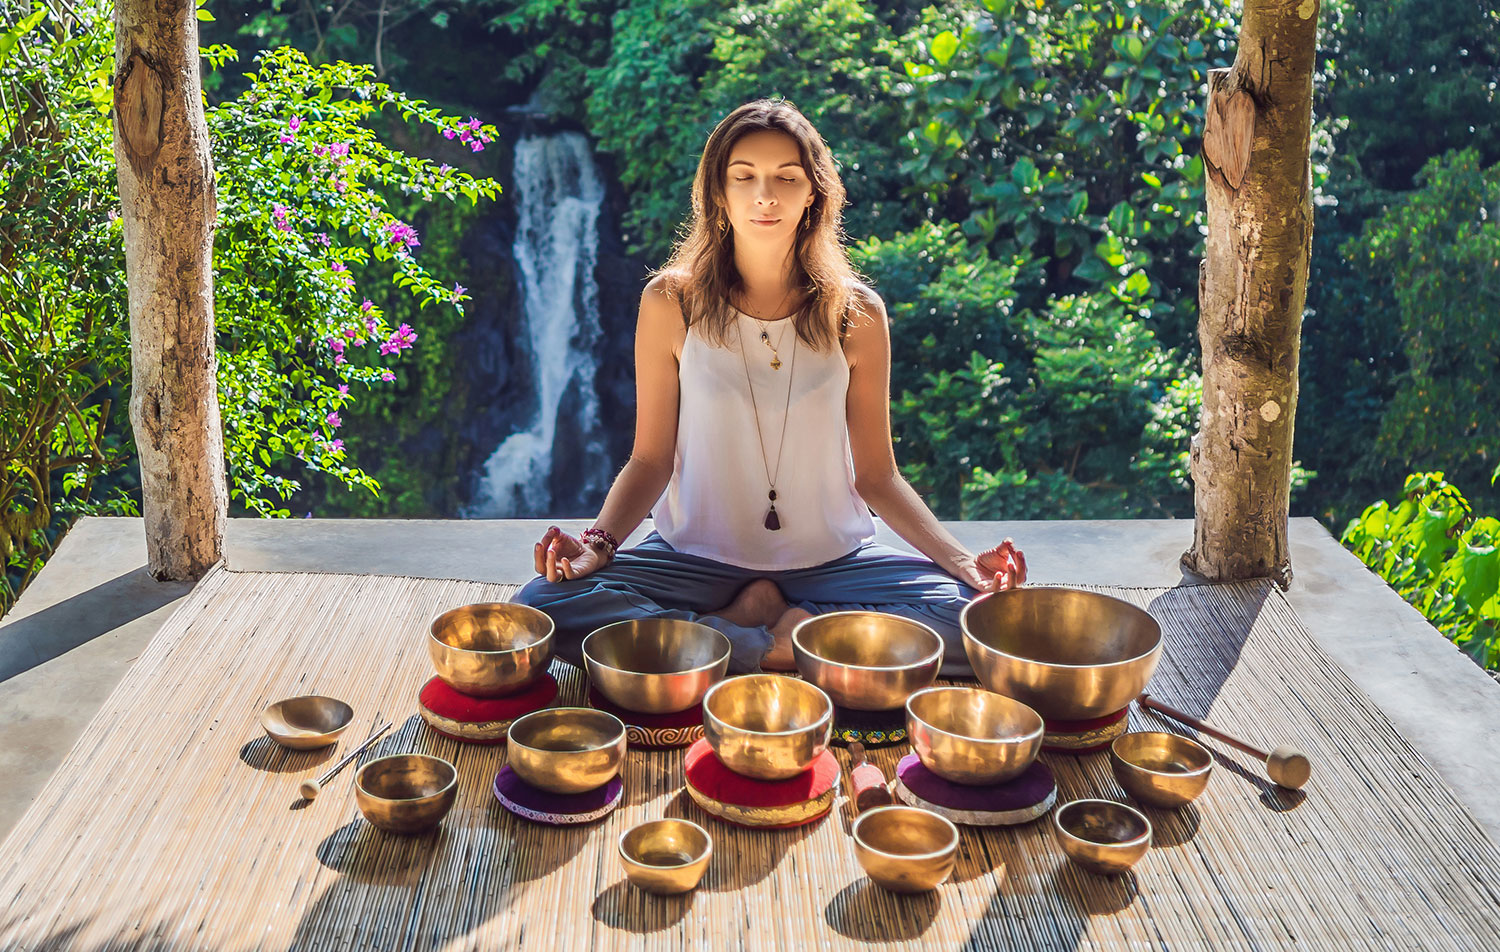 How to Use a Meditation Bowl to Shift Your Consciousness